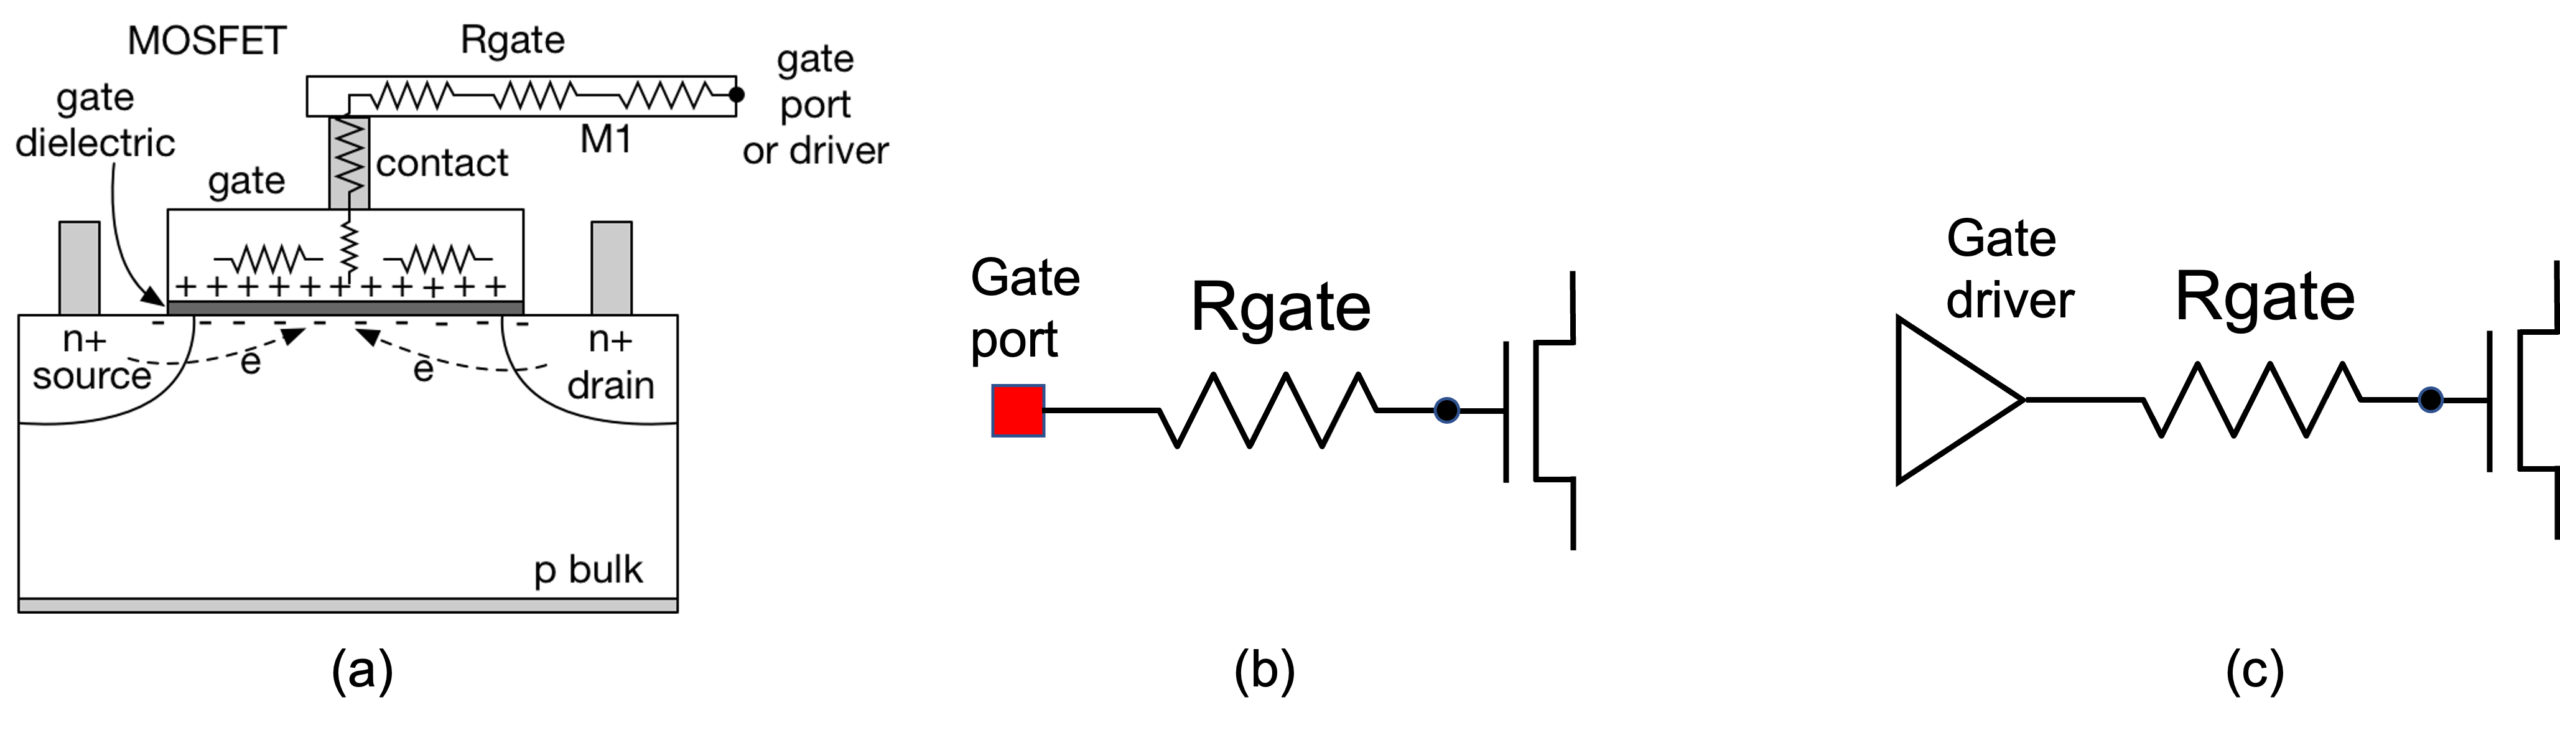 MOSFET cross-section and schematic illustration of gate resistance.